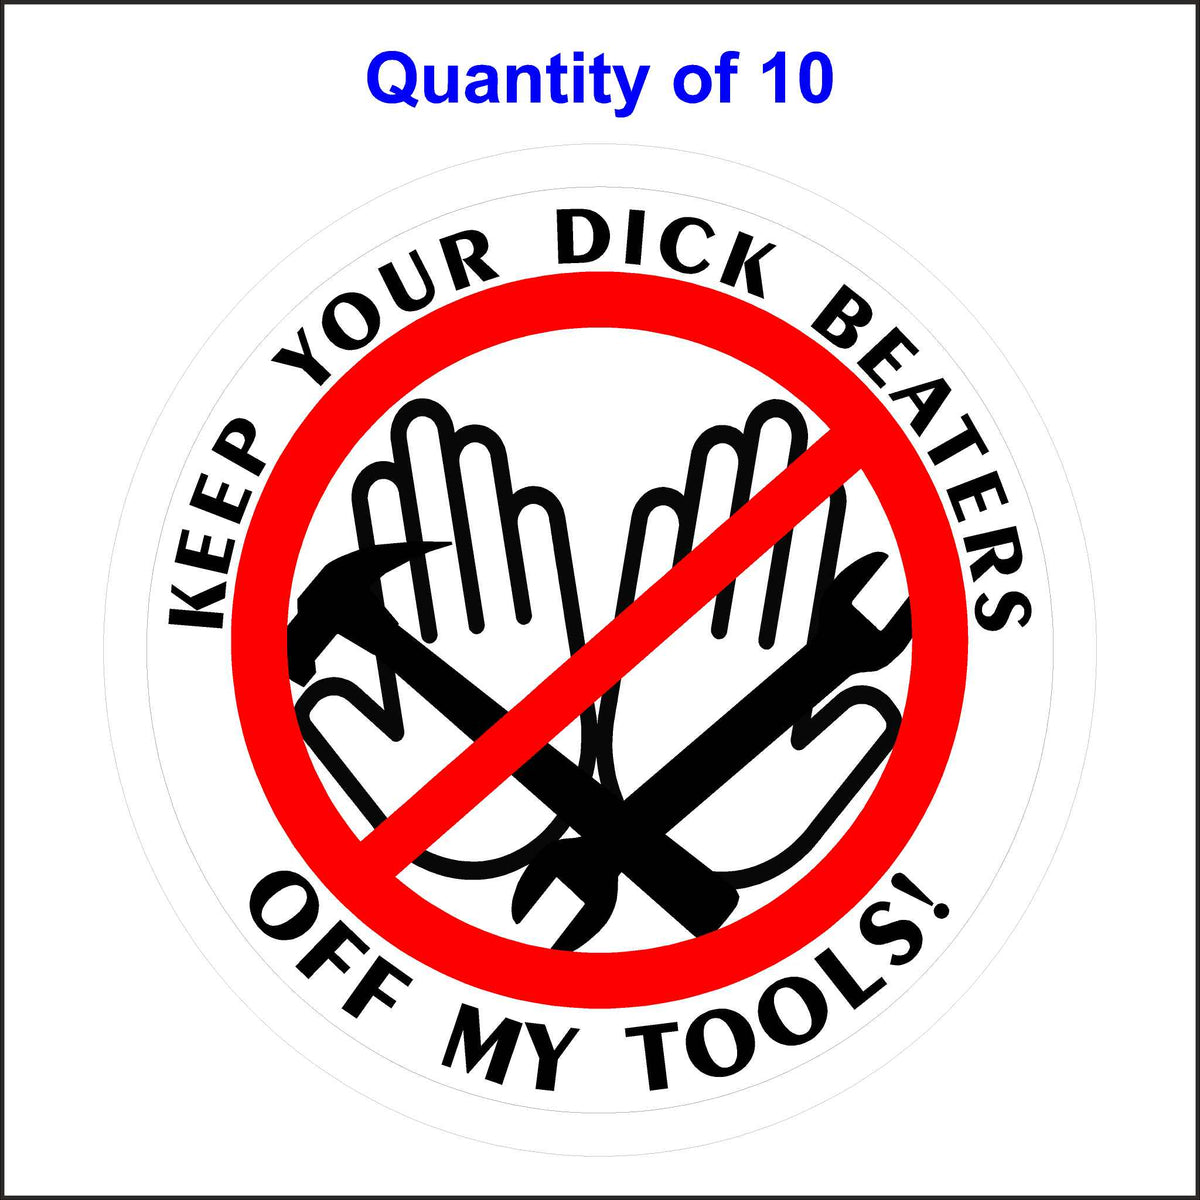 Keep Your Dick Beaters Off My Tools Sticker. 10 Quantity.